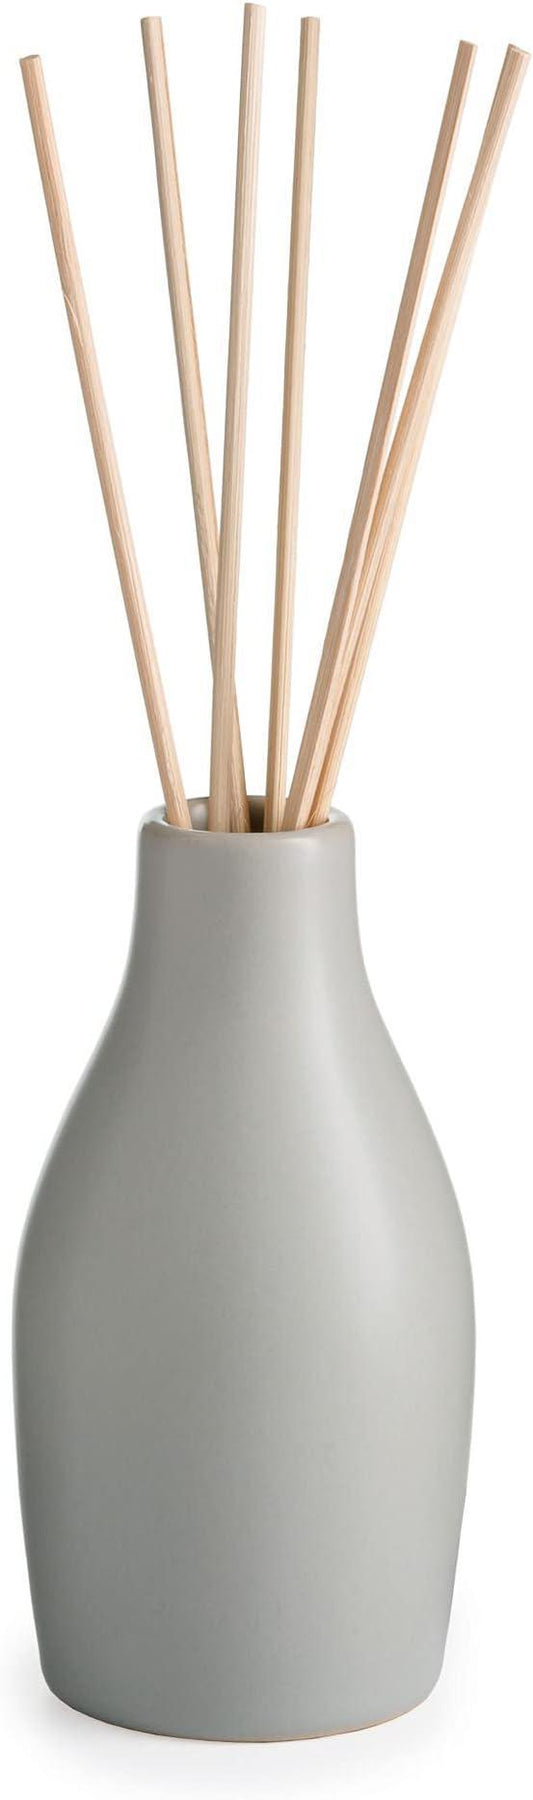 Ceramic Reed Diffuser with Home Fragrance Oil Set